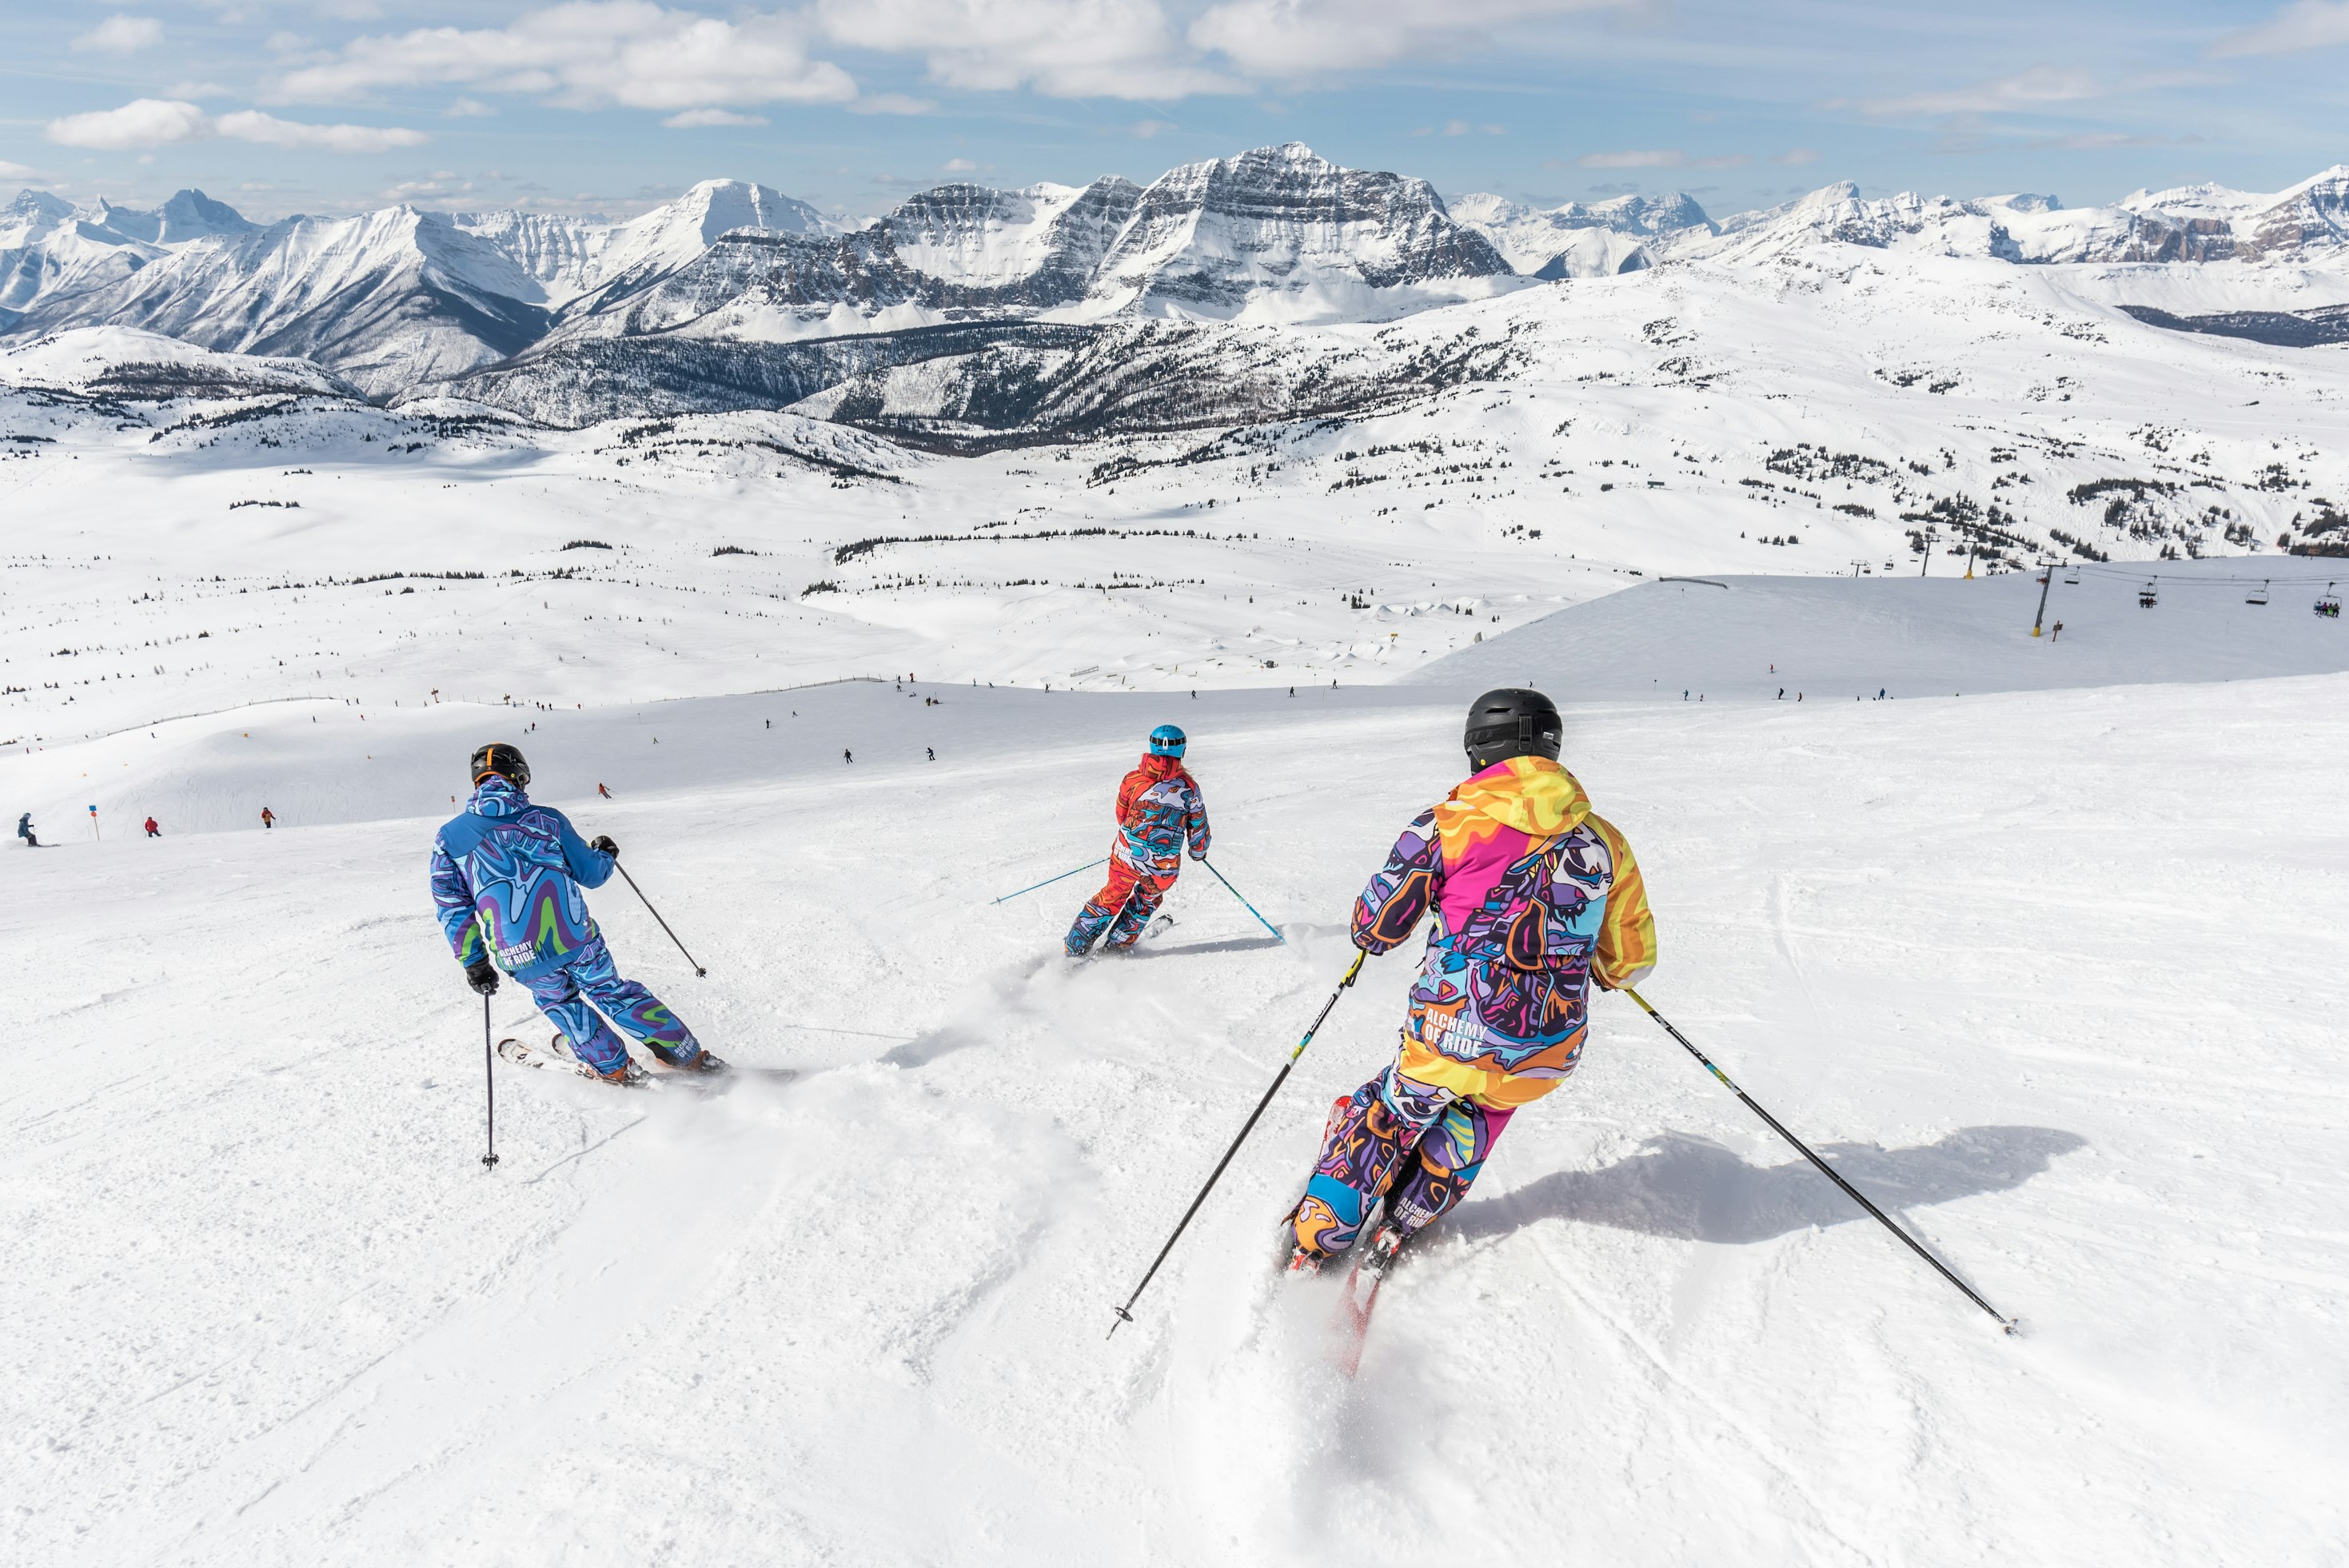 The Truth About Why Us Ski Resorts Have Become So Expensive (And Where to Go Instead!)